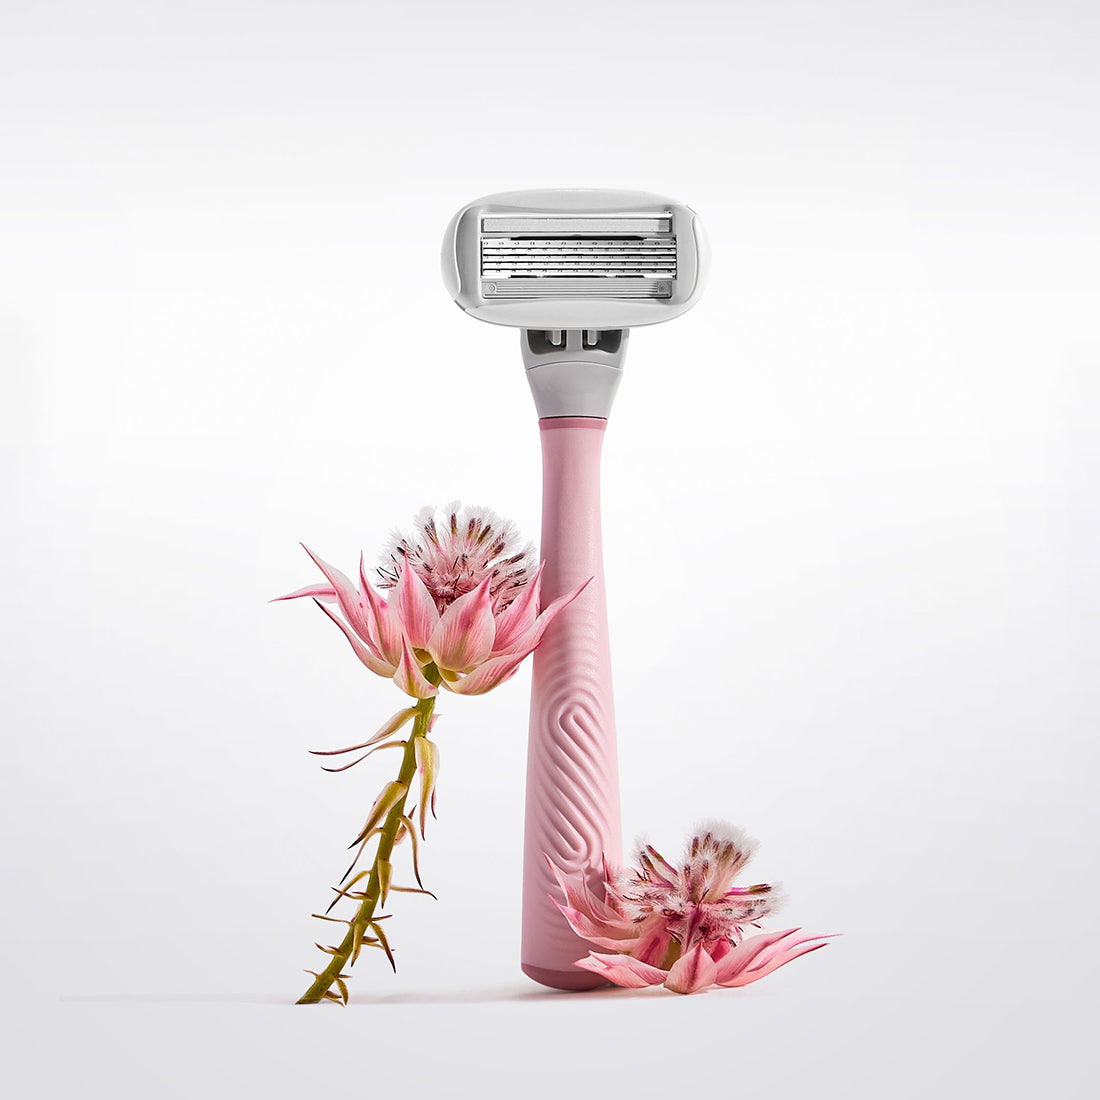 Flamingo Razor in the color Rose pictured with two pink flowers